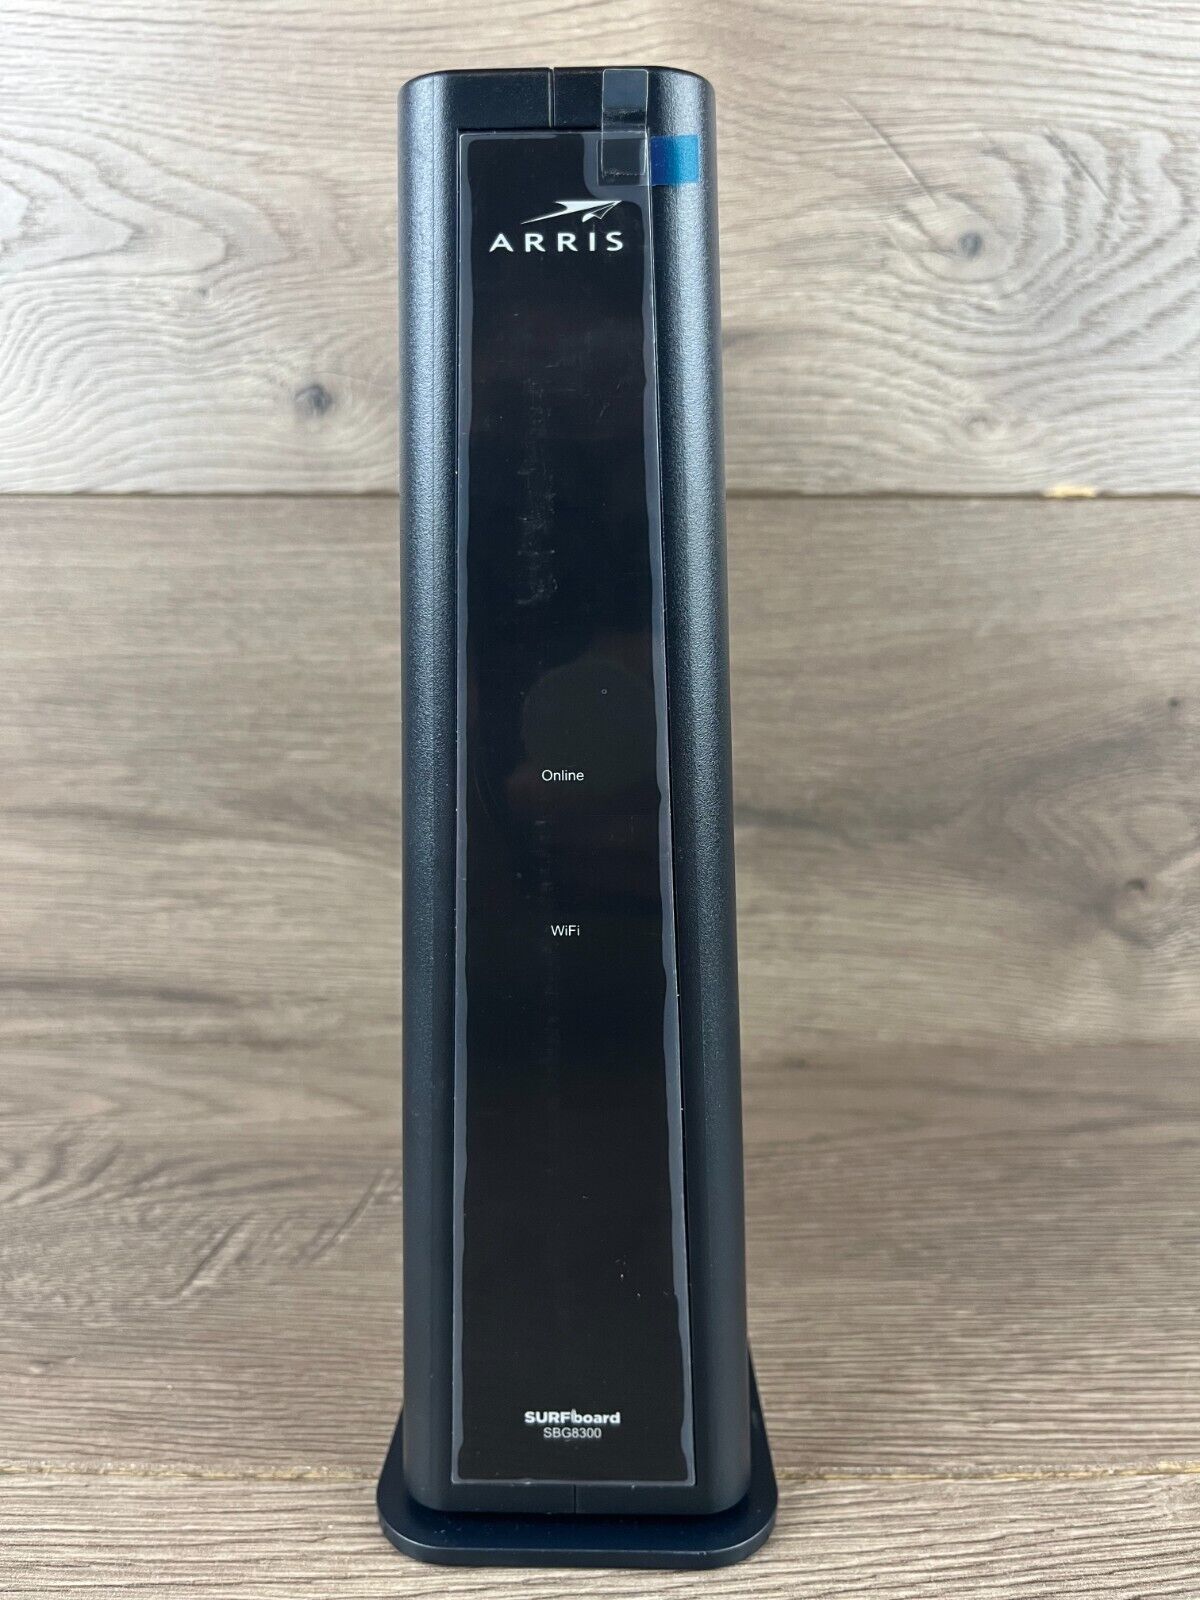 ARRIS SURFboard SBG8300 and AC2350 Wi-Fi Router (Tested) Pre-Owned.